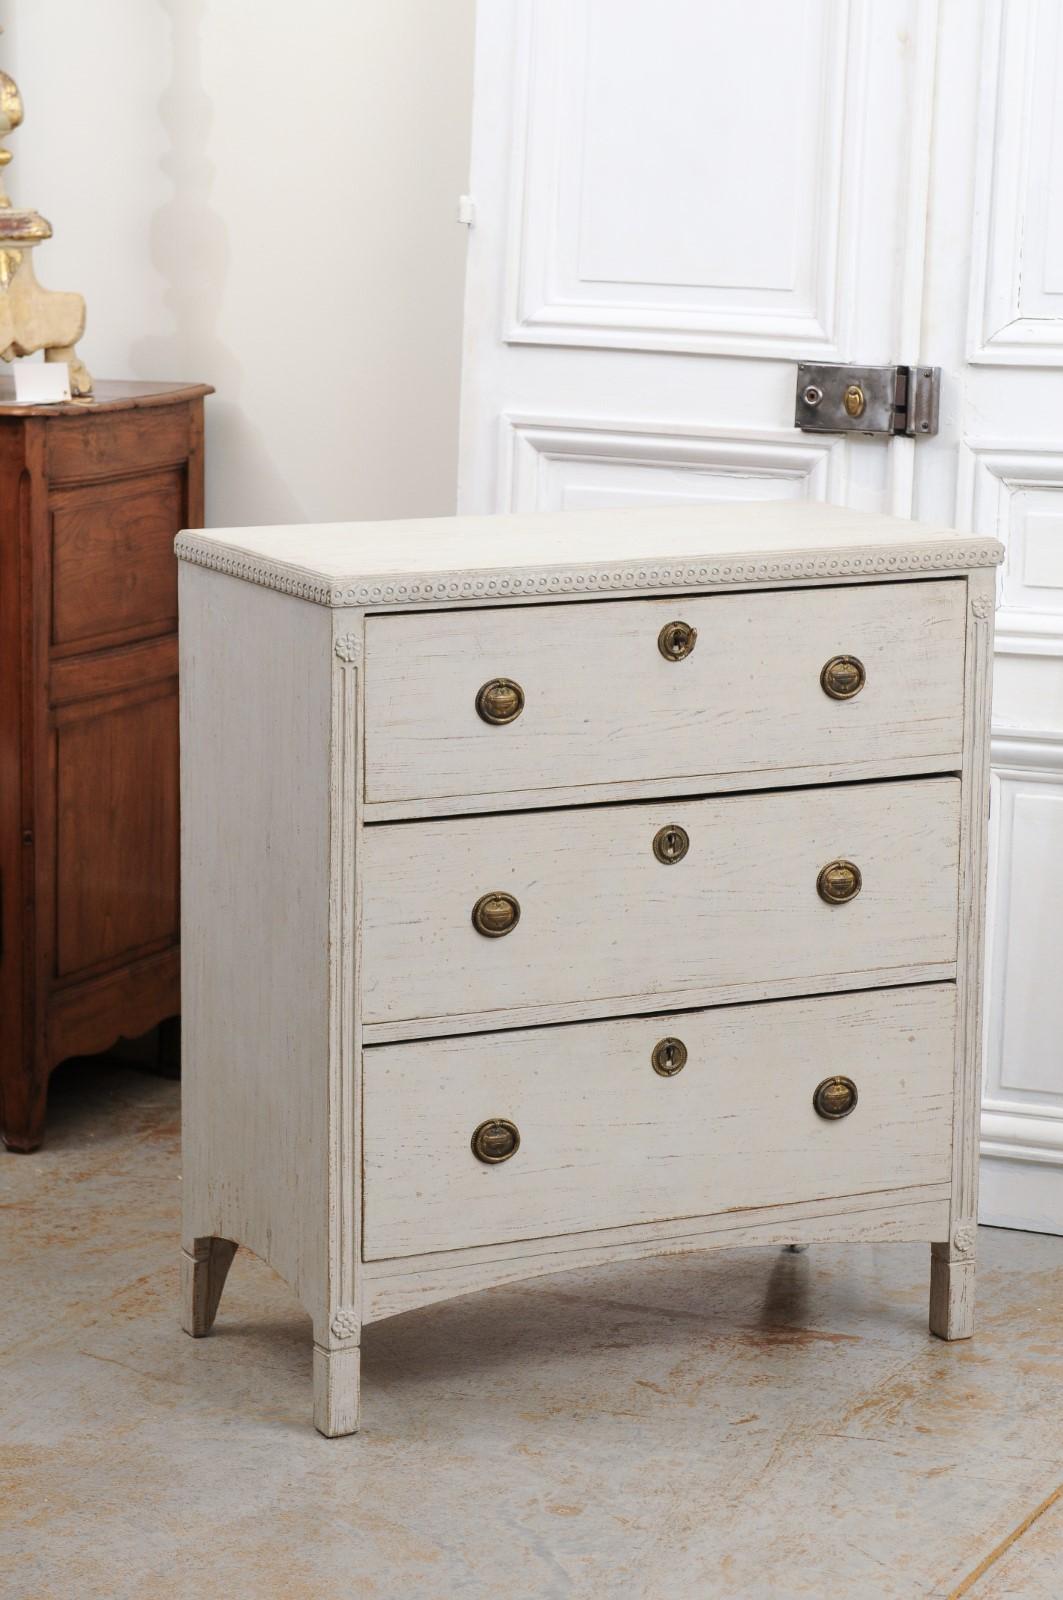 A Swedish Gustavian style painted wood chest from the 19th century, with three drawers, carved guilloche frieze and fluted accents. Created in Sweden during the 19th century, this Gustavian style painted chest features a rectangular top sitting